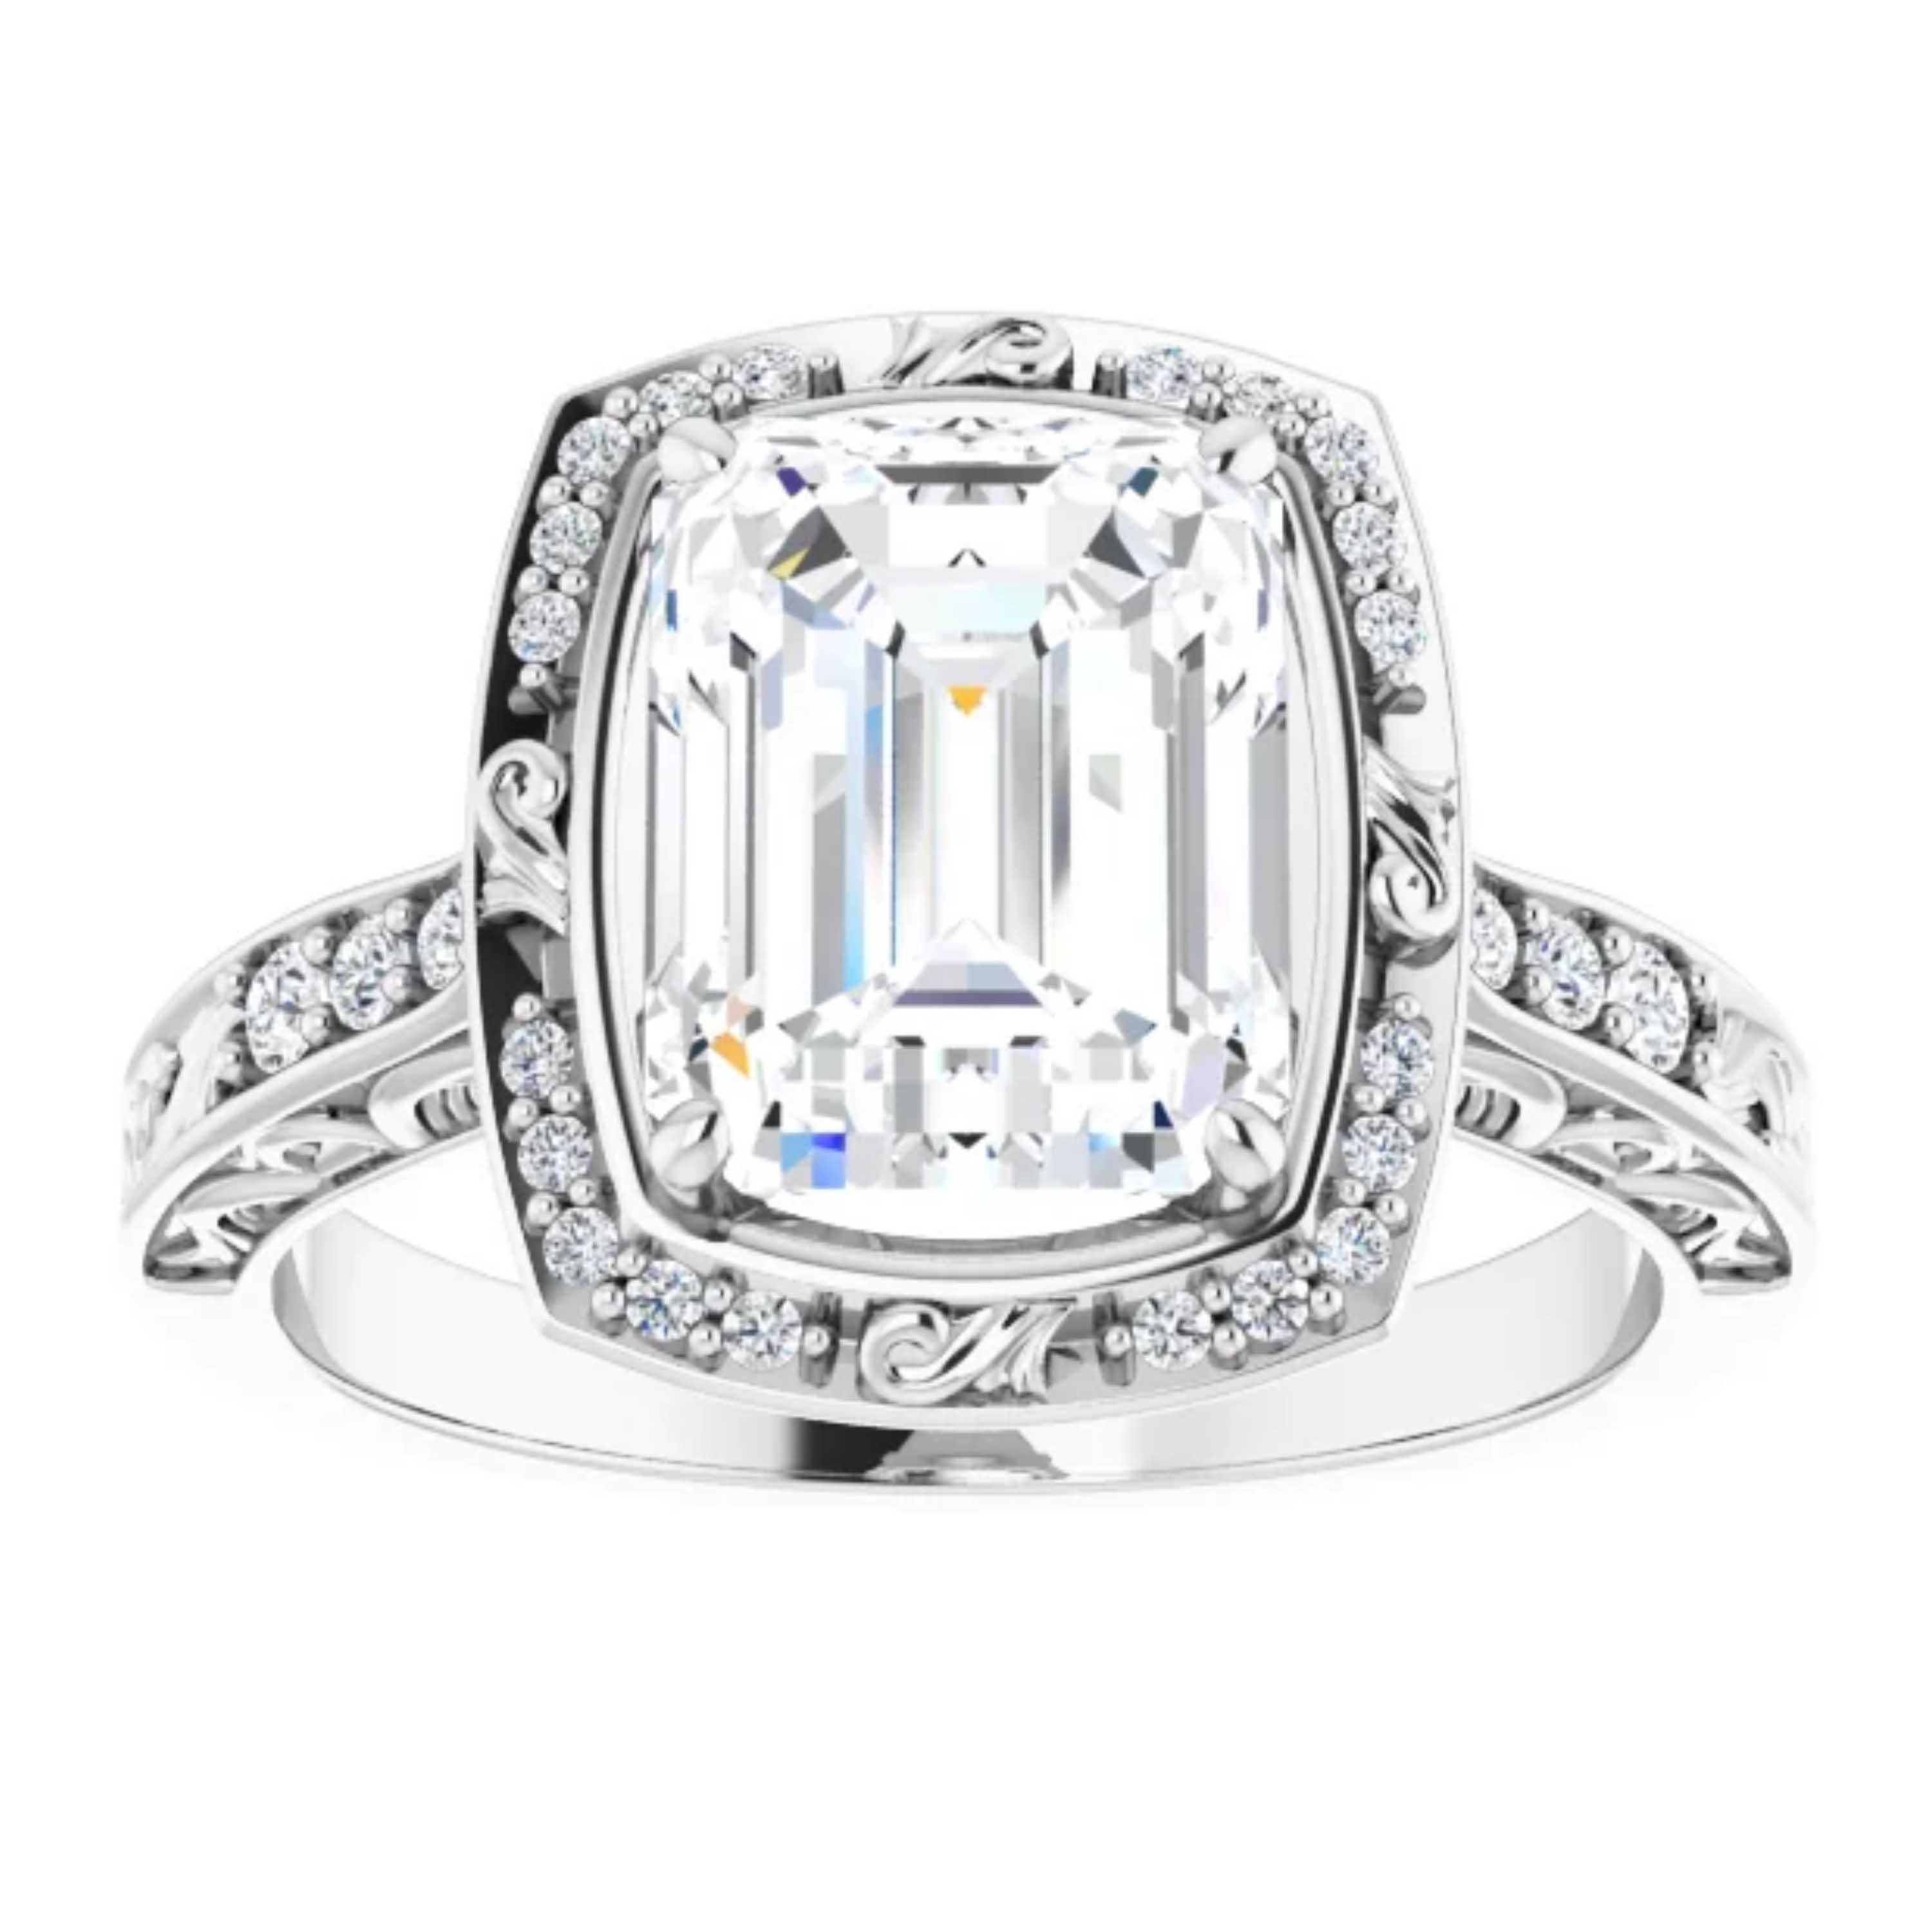 The GIA certified emerald cut center diamond on this beautiful engagement ring is ornamented with adorable filigrees and a halo of shimmering white diamonds. Additional diamonds and intricate filigrees float along the shank. Handcrafted in 14k white